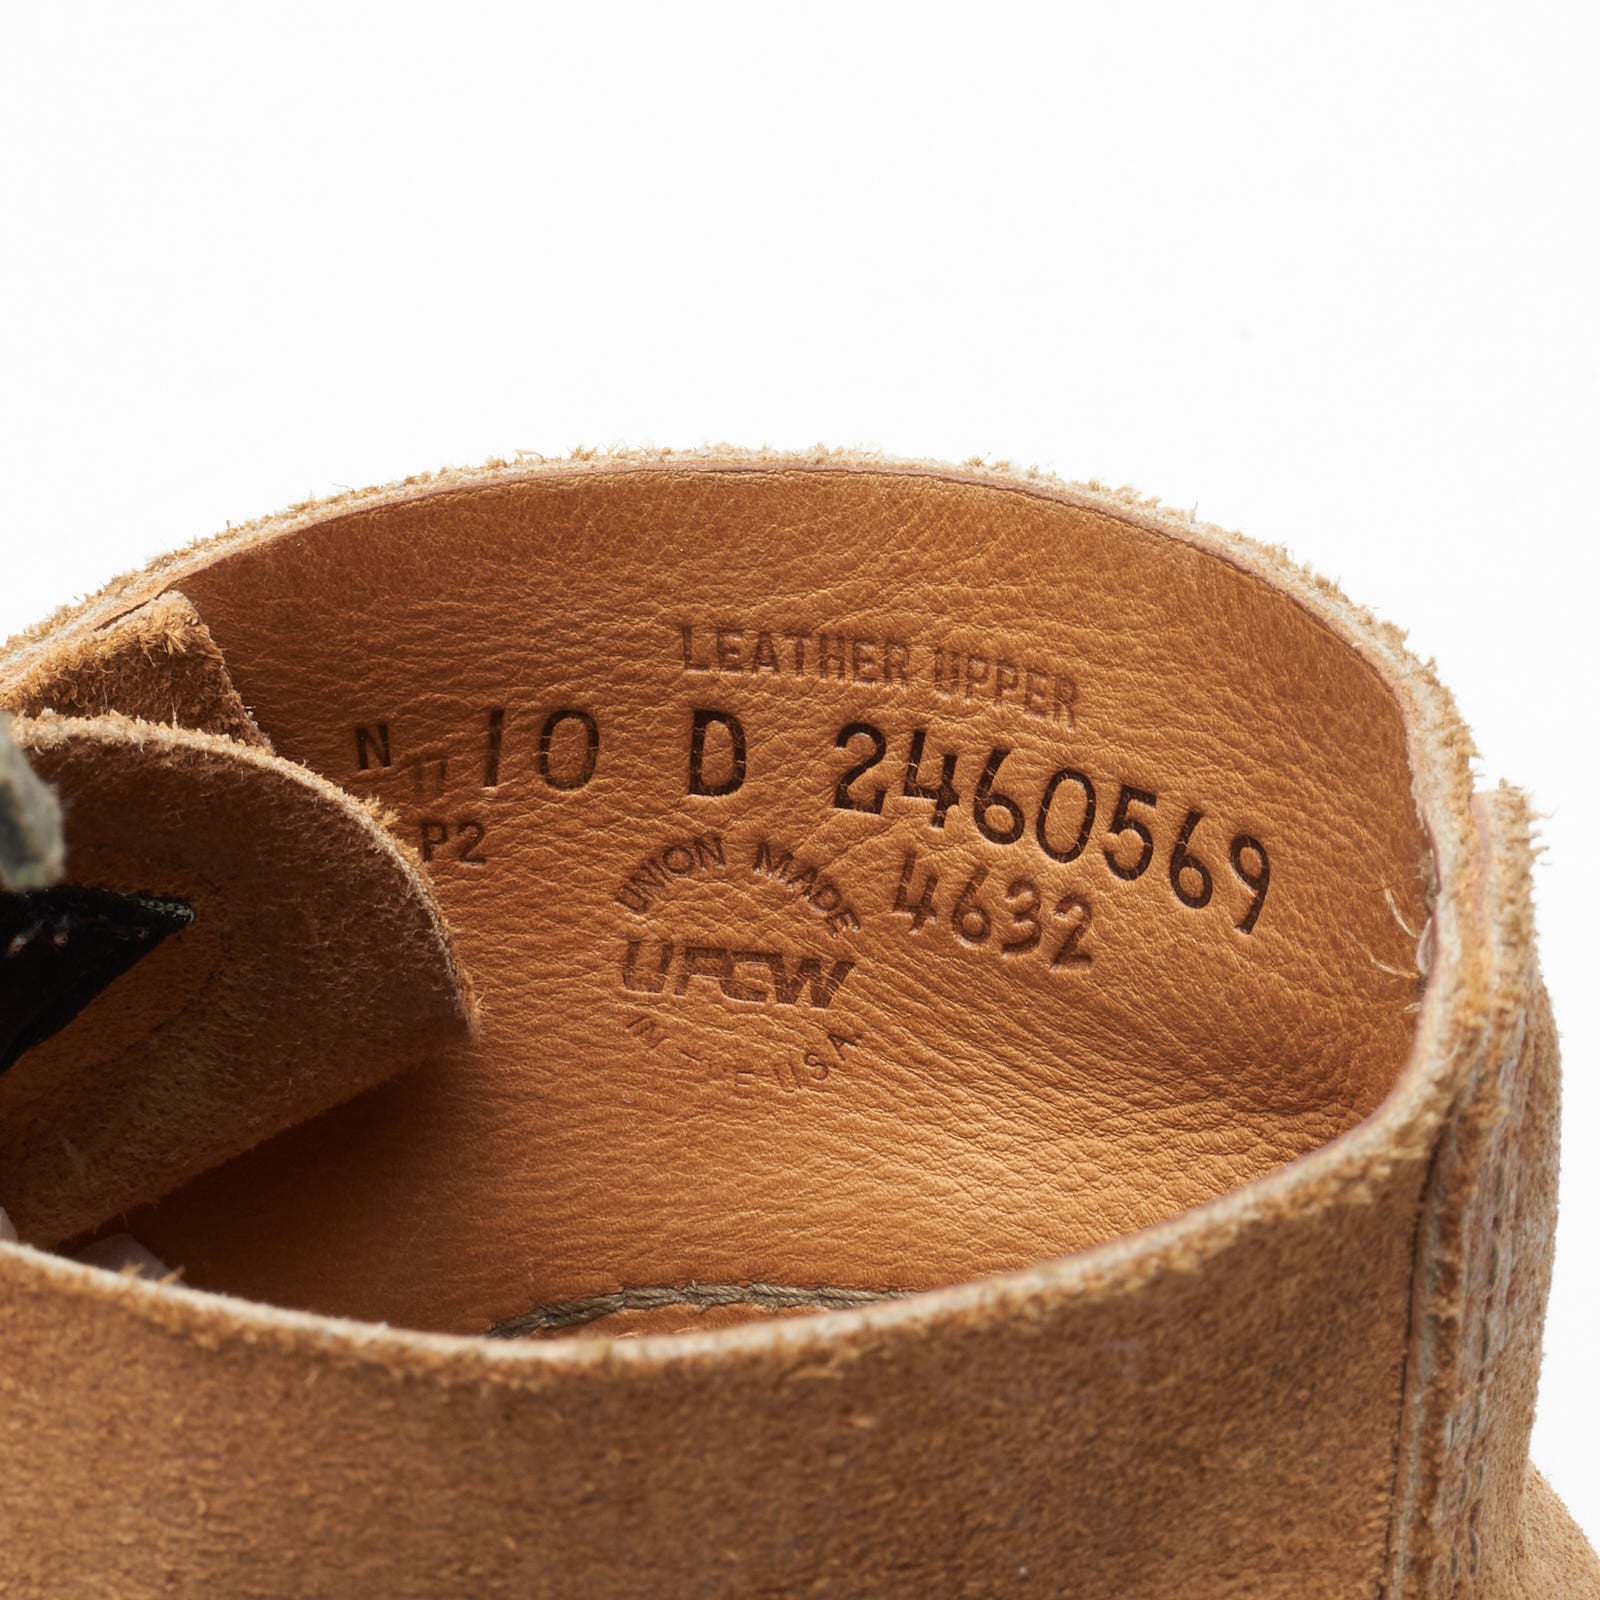 RED WING X NIGEL CABOURN 4632 Heritage Chukka Boots US 10 D Munson Limited Ed. RED WING SHOES